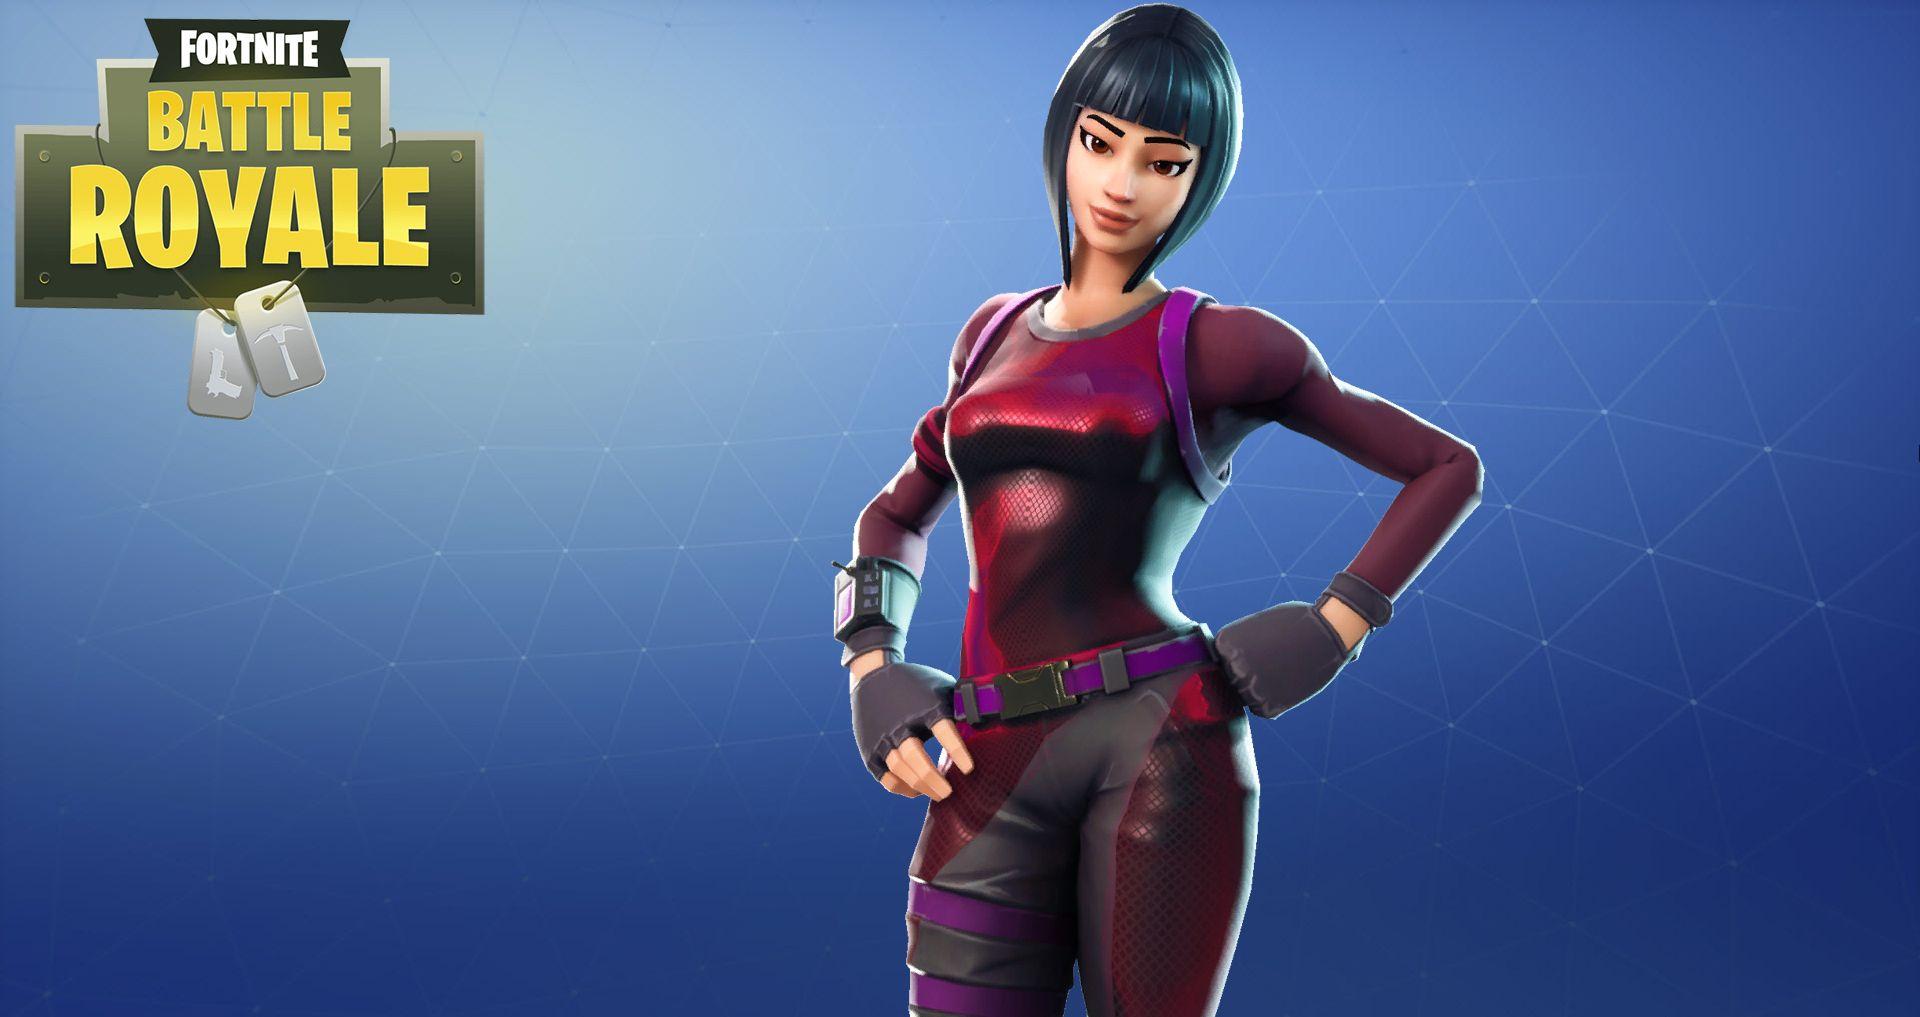 Brilliant Striker Fortnite Outfit Skin How to Get + News.